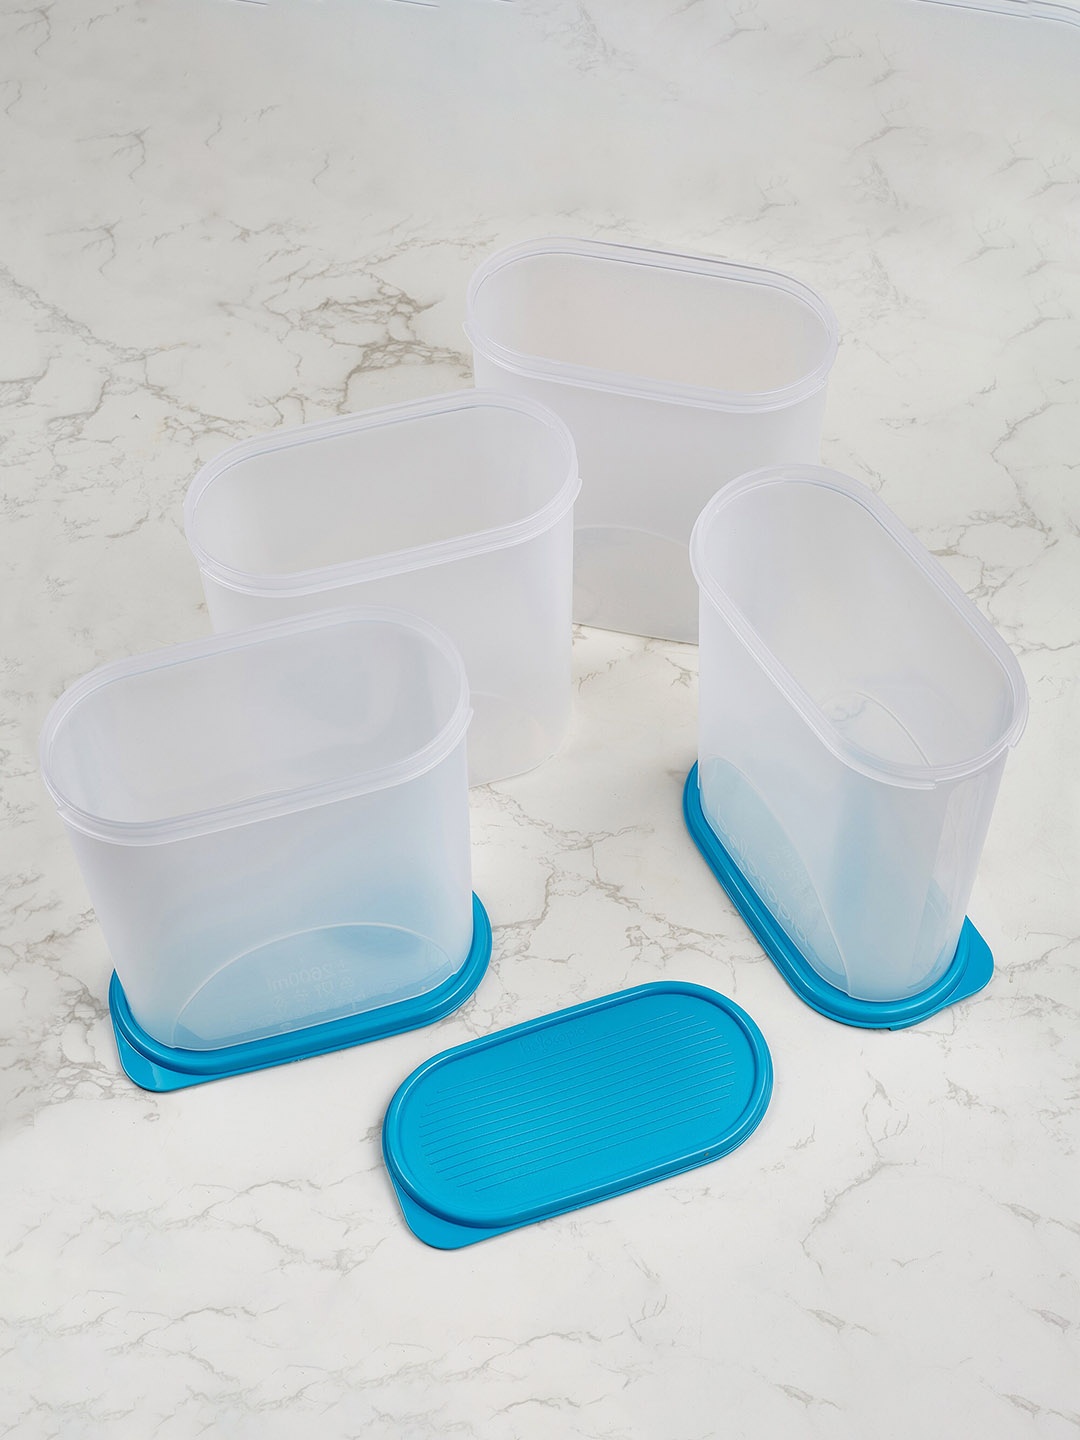 

HomeTown Set of 4 BPA-Free Plastic Container, Blue